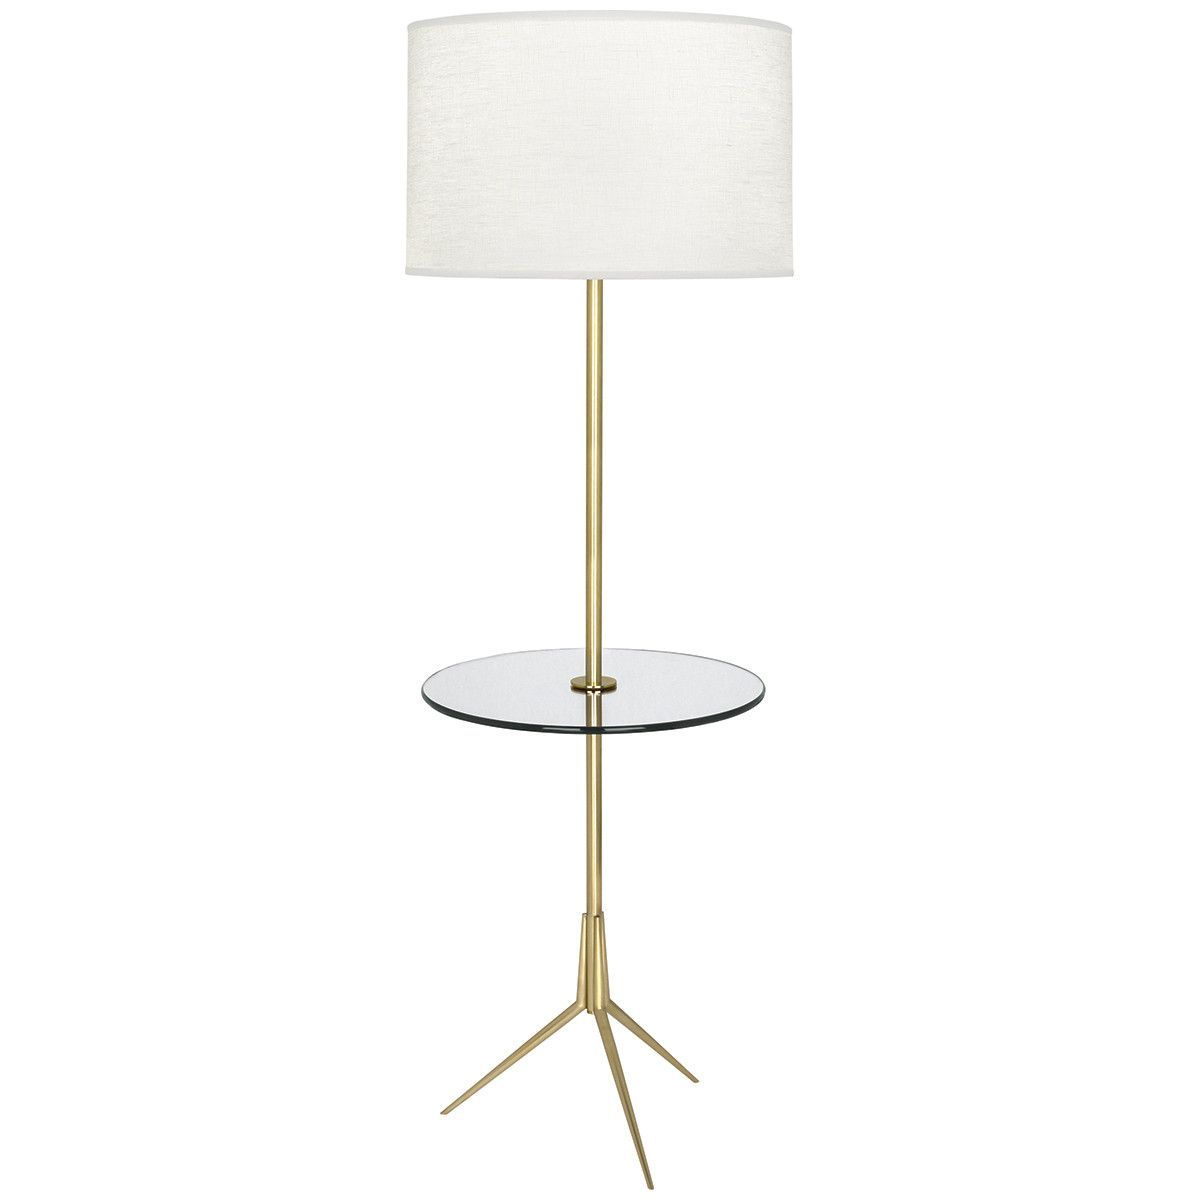 Robert Abbey Martin Glass Tray Table Floor Lamp Dustriual intended for sizing 1200 X 1200